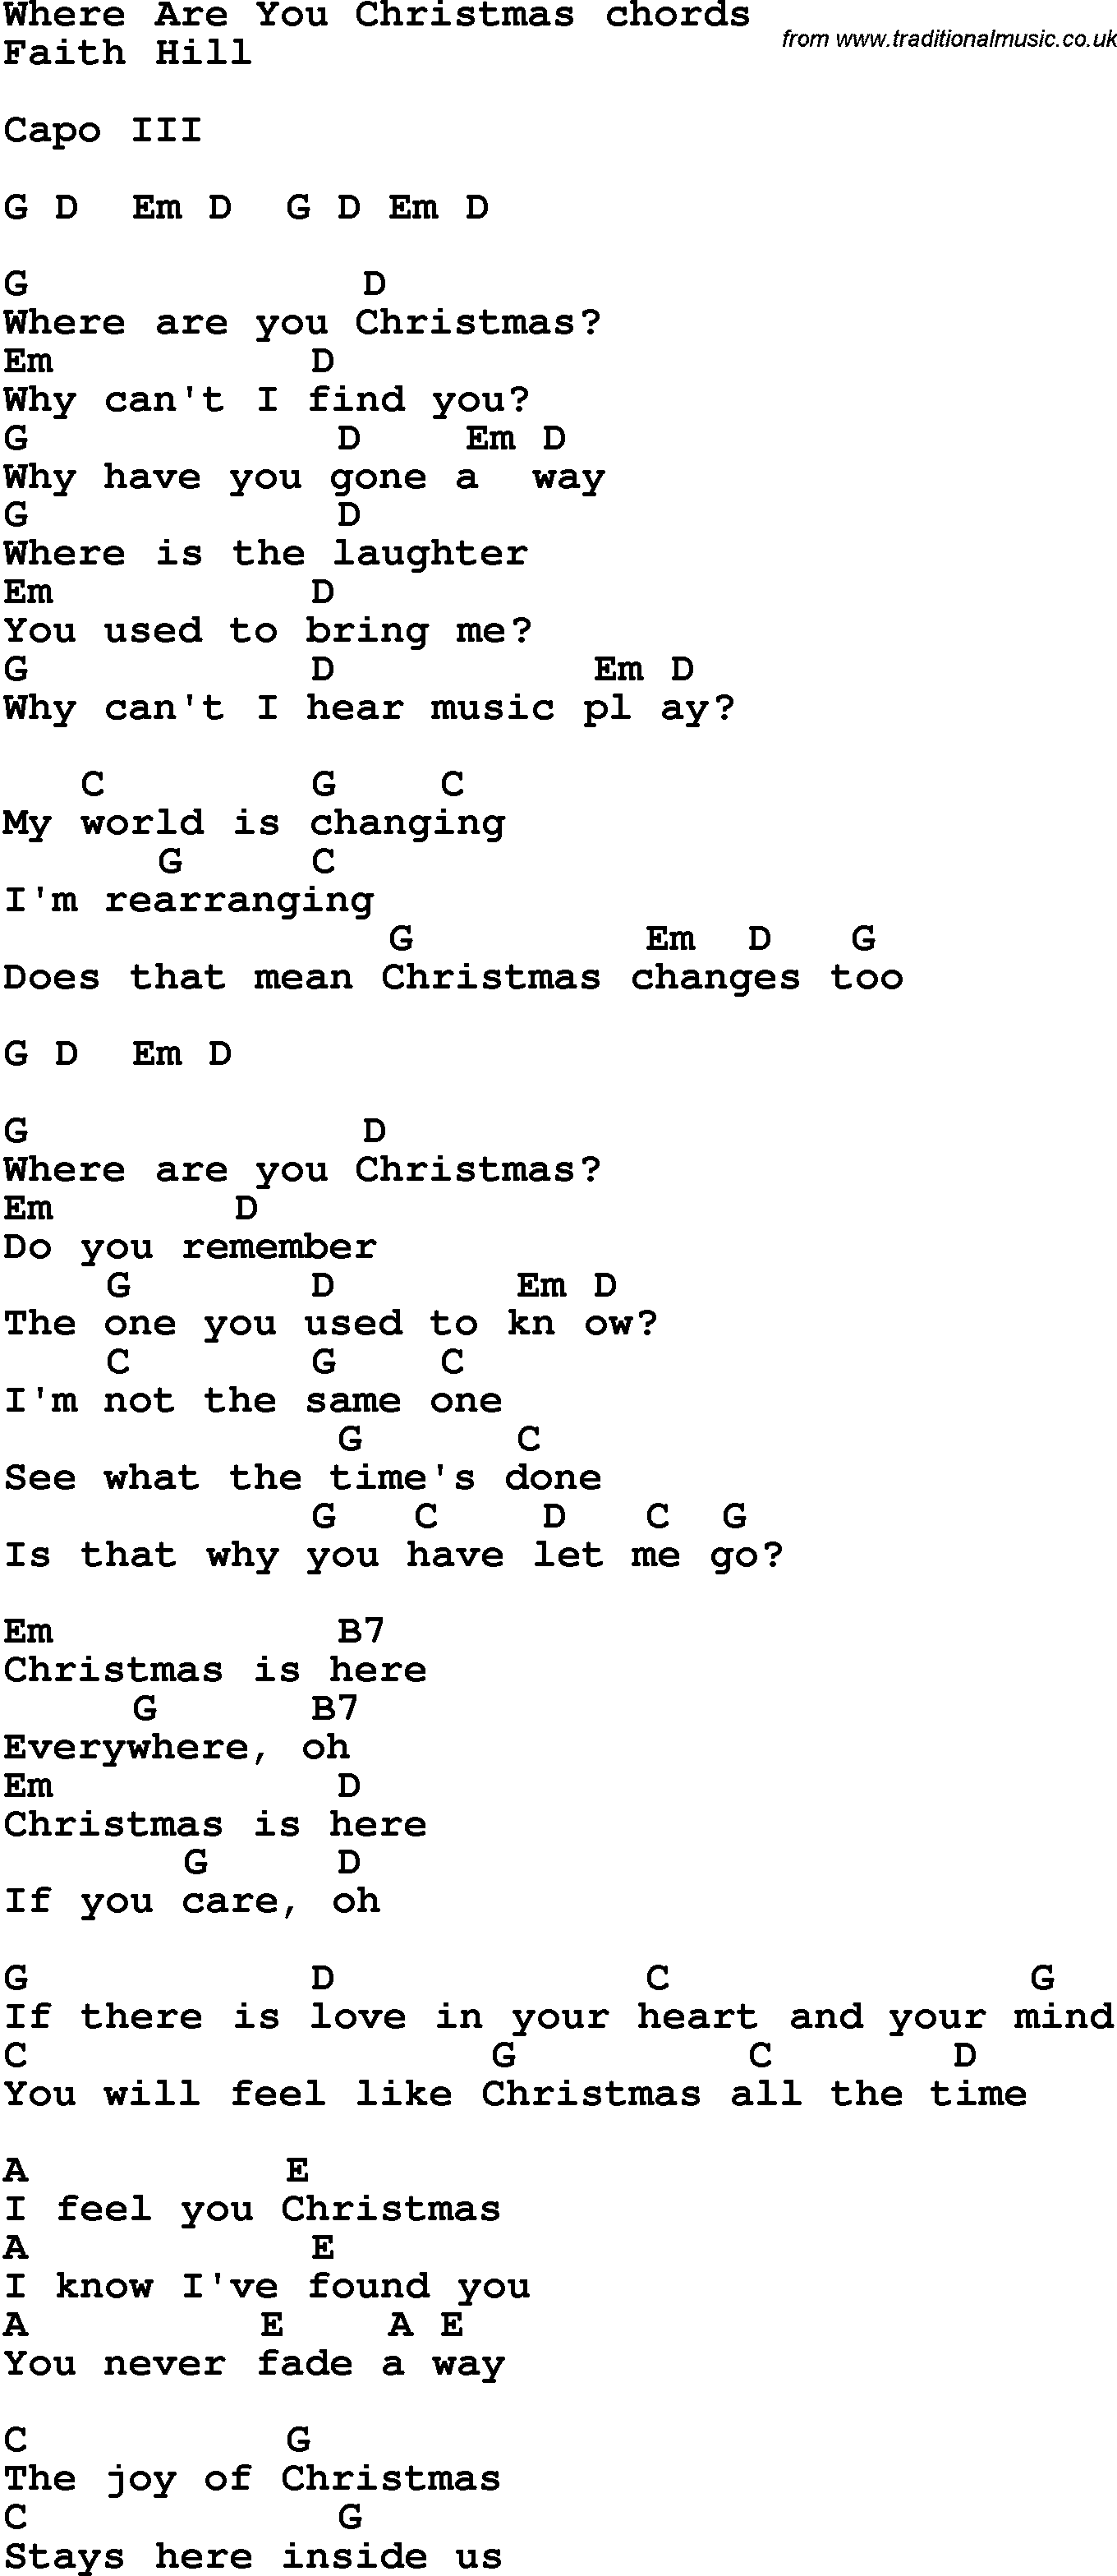 song-lyrics-with-guitar-chords-for-where-are-you-christmas